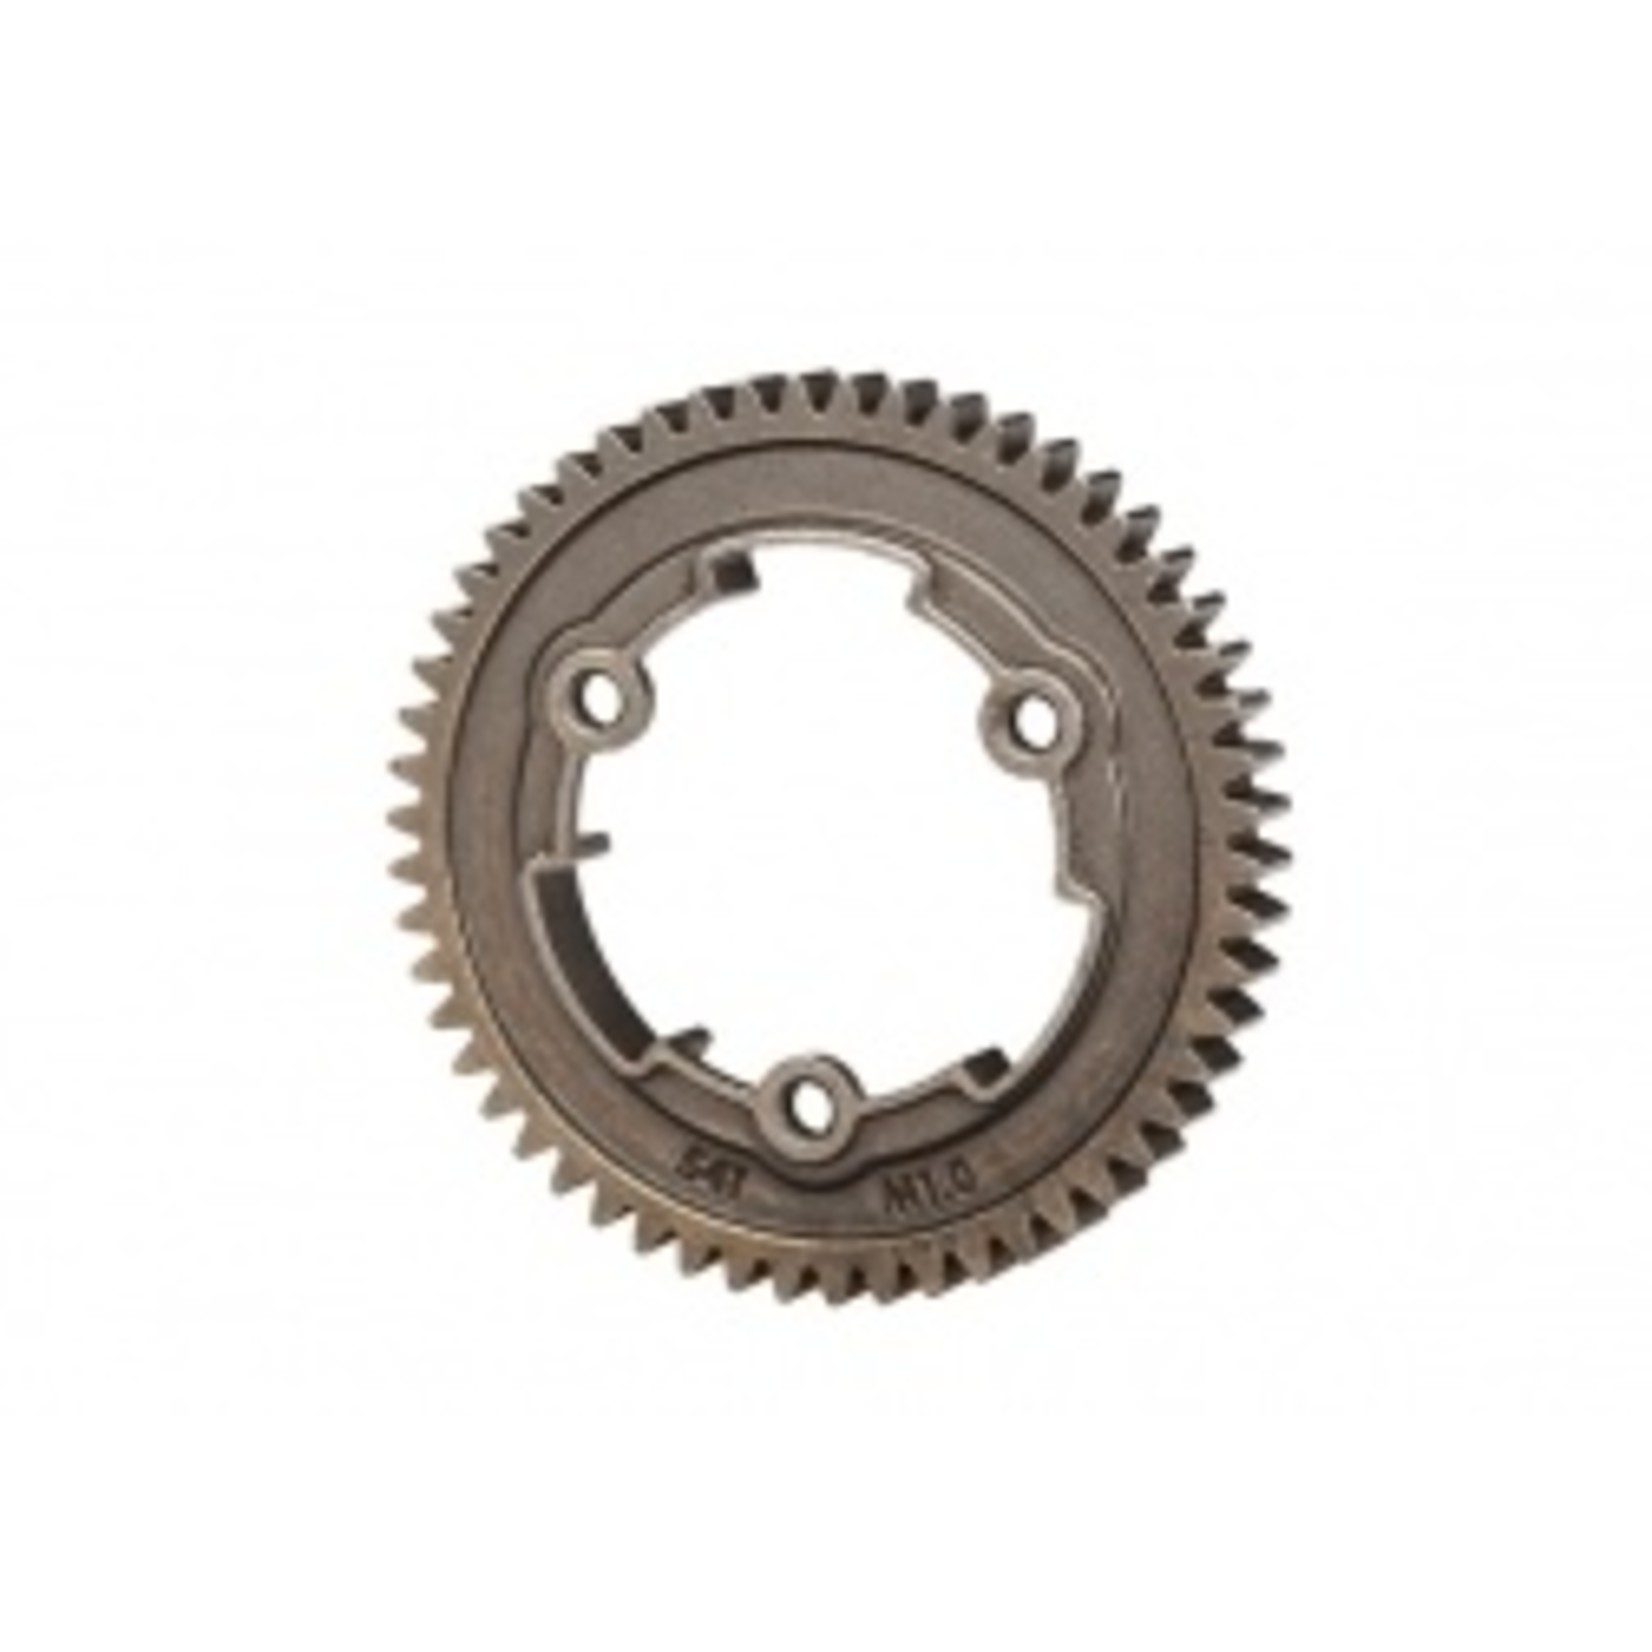 Traxxas Spur gear, 54-tooth, steel (1.0 metric pitch)